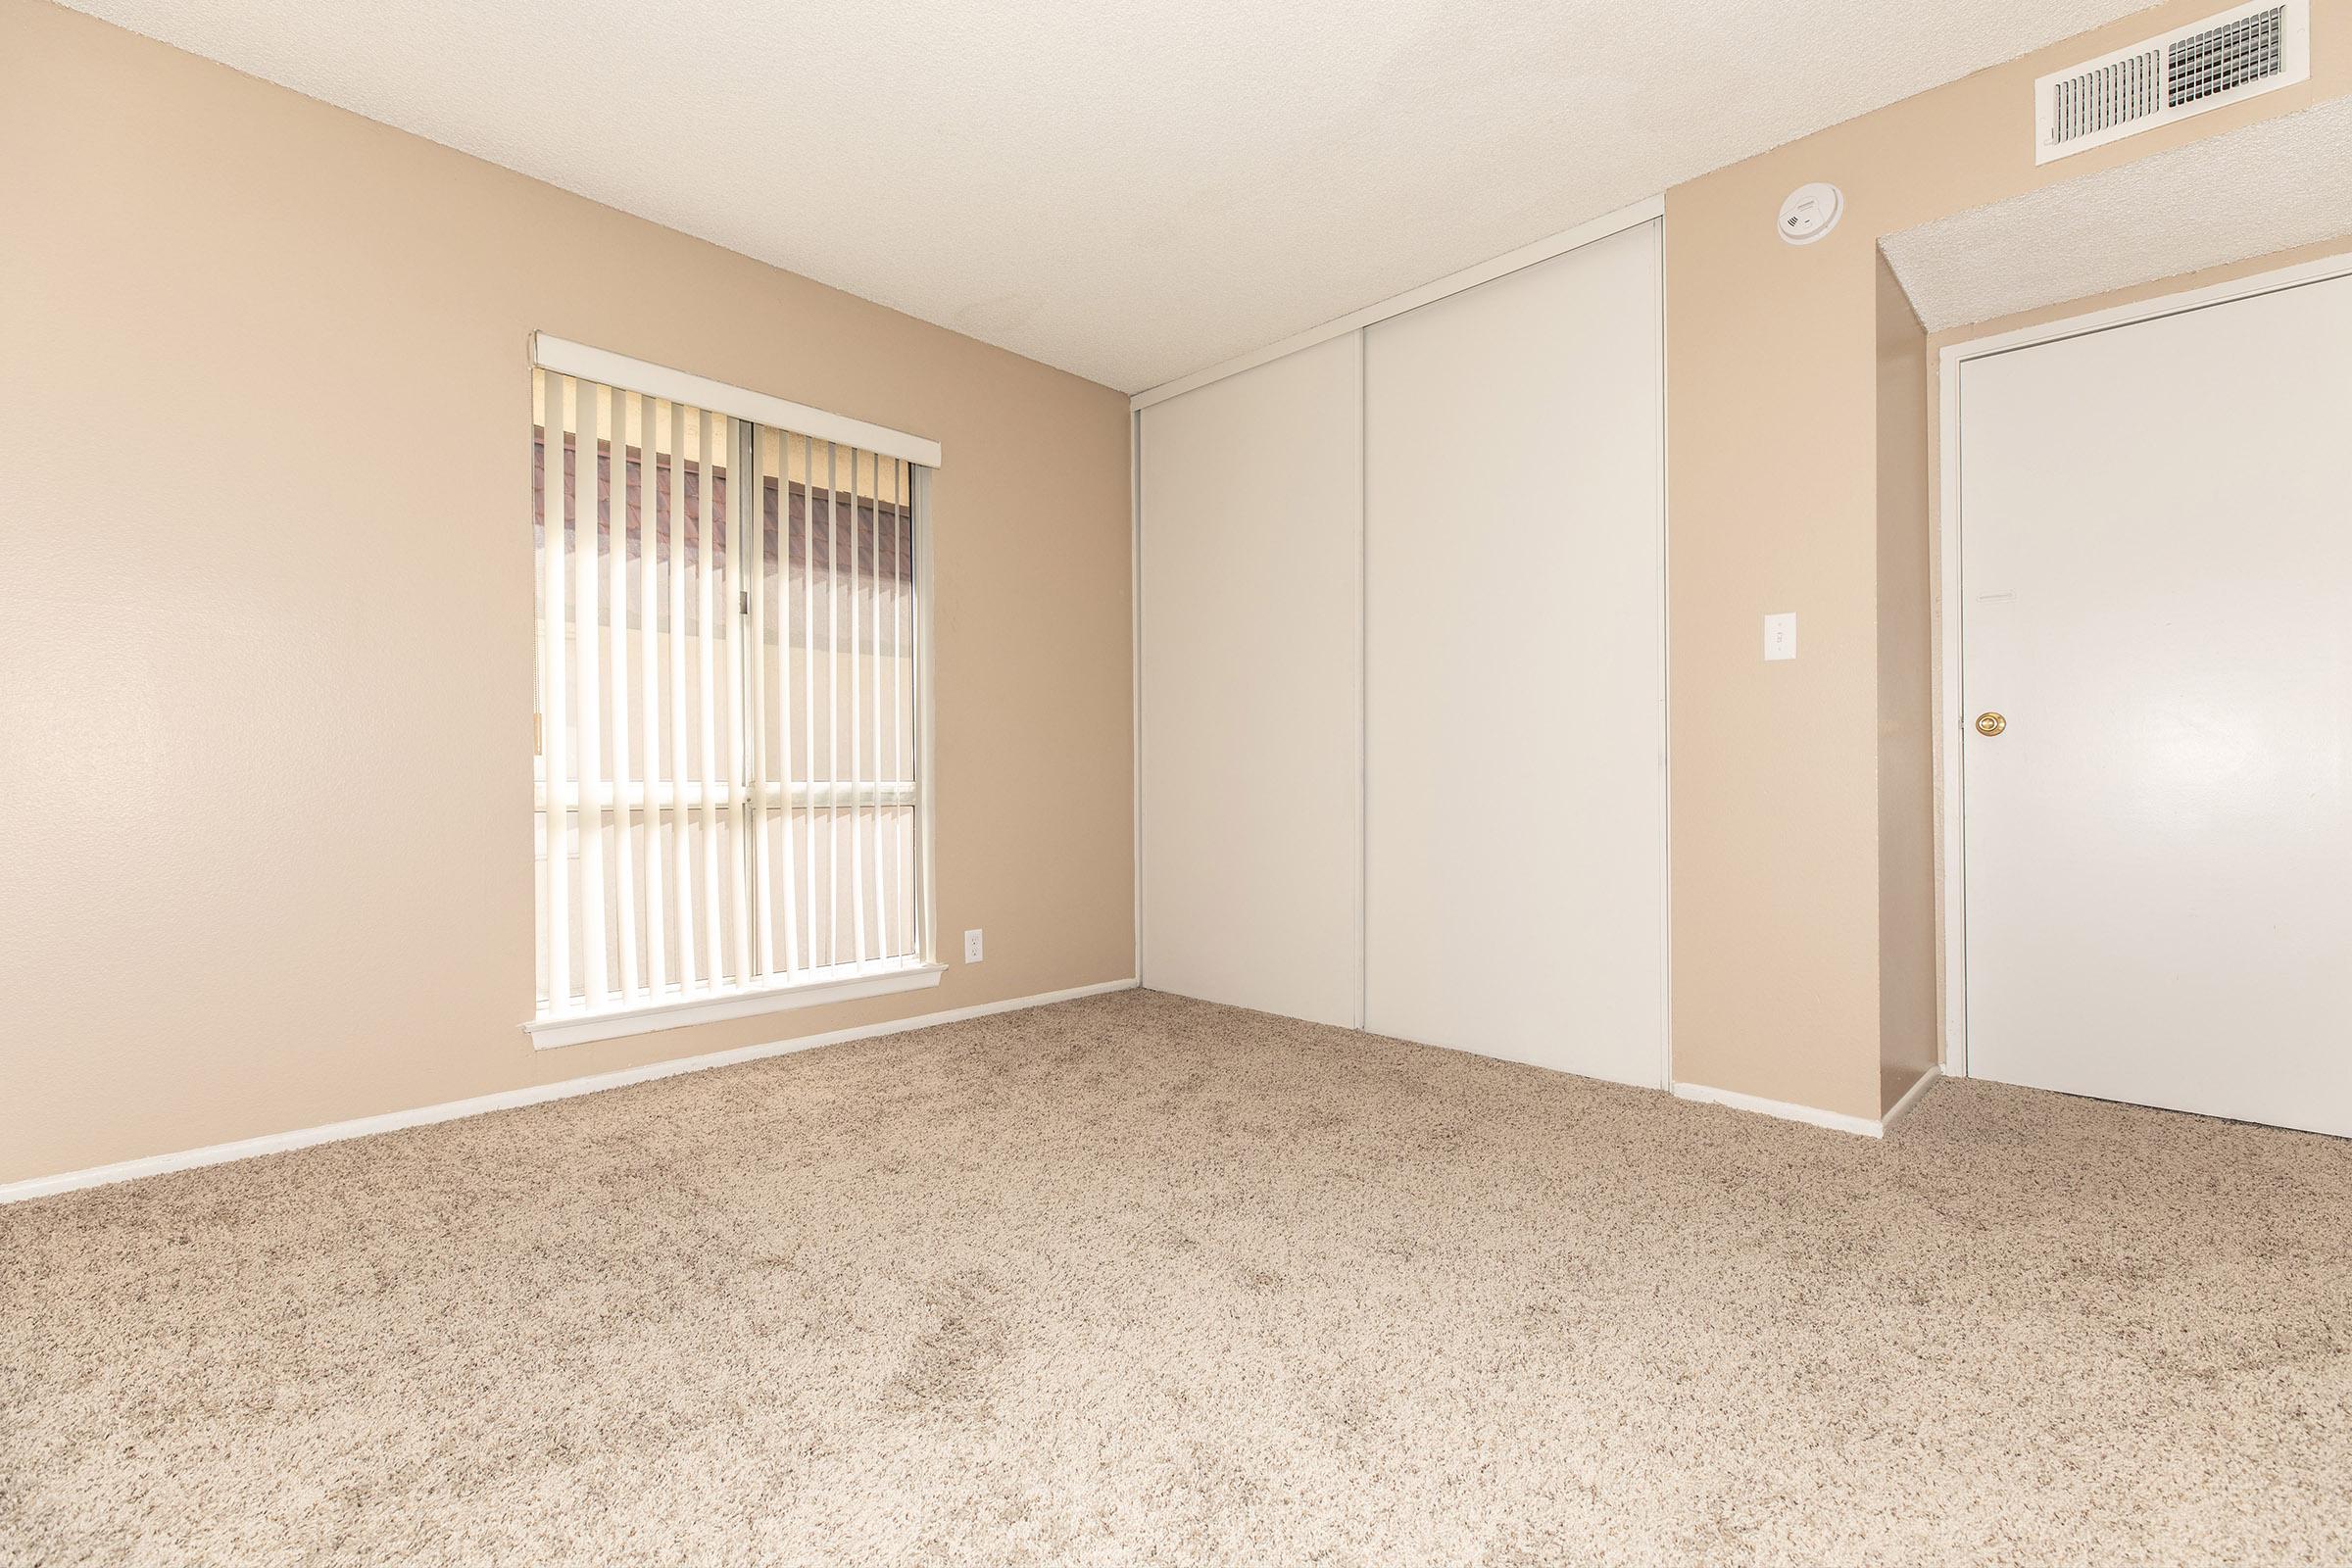 Vacant carpeted bedroom with closed sliding closet doors